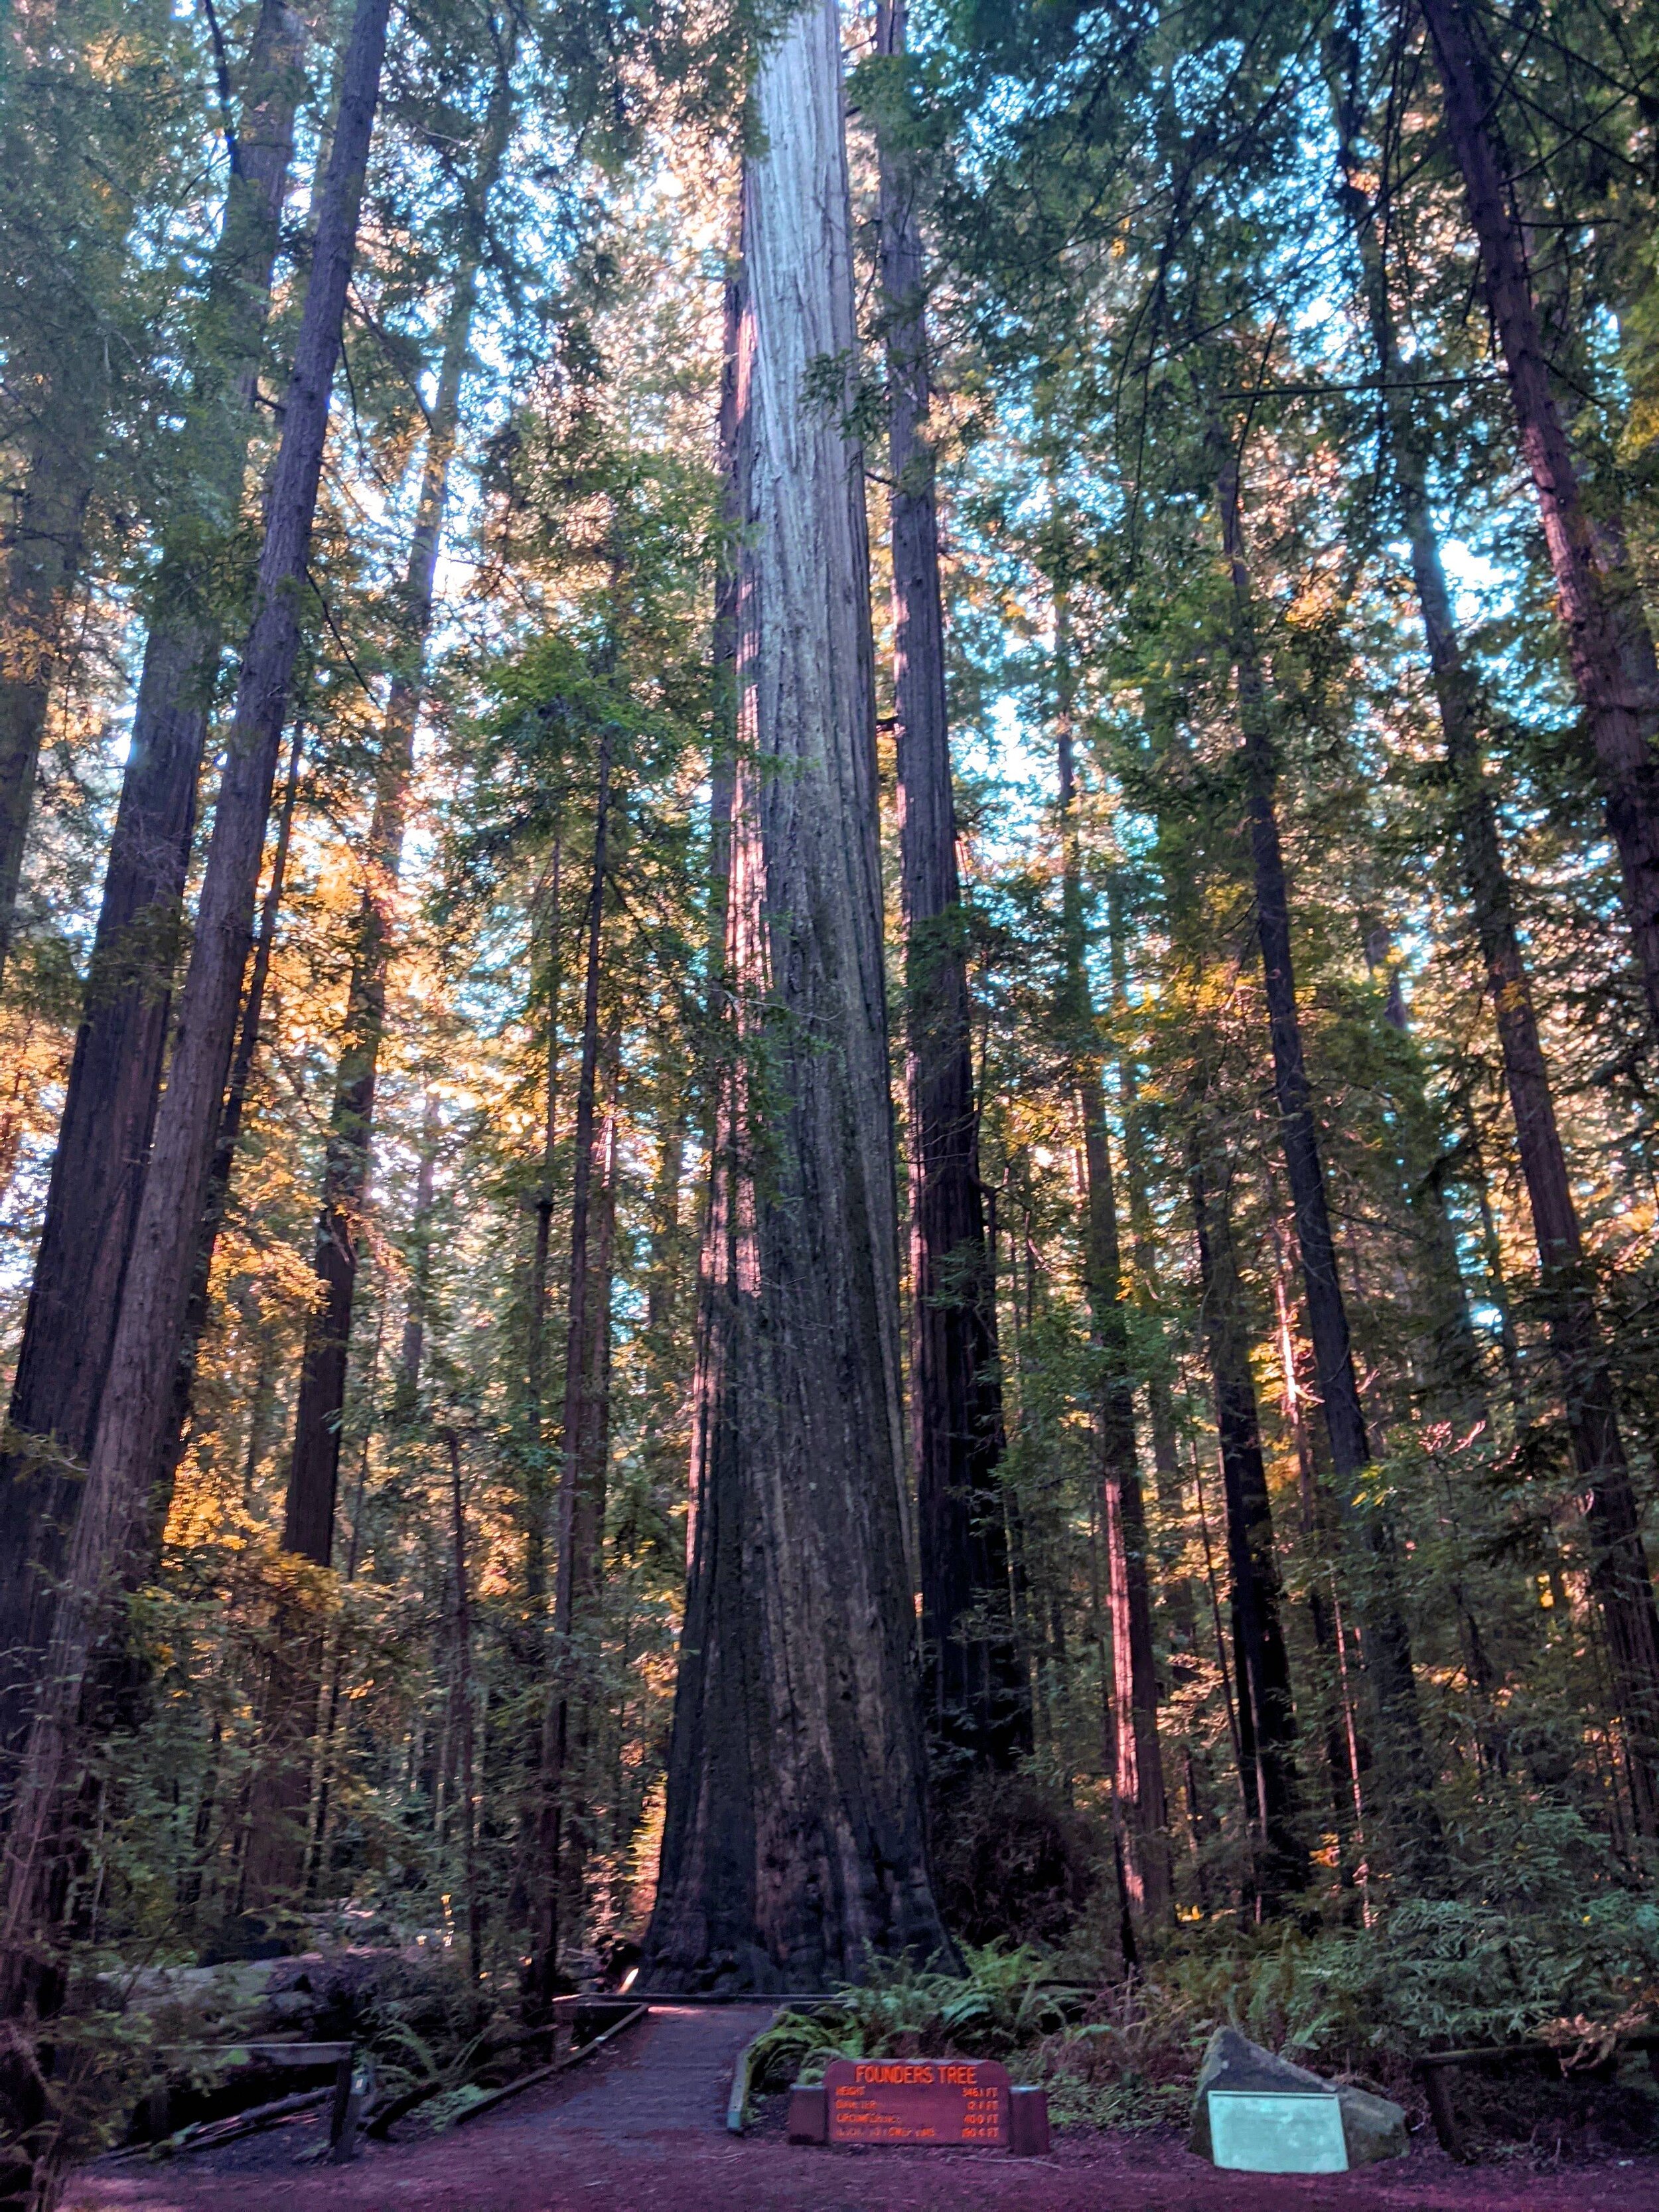 a-edit-first-California-Redwoods-Founders-Tree.jpg